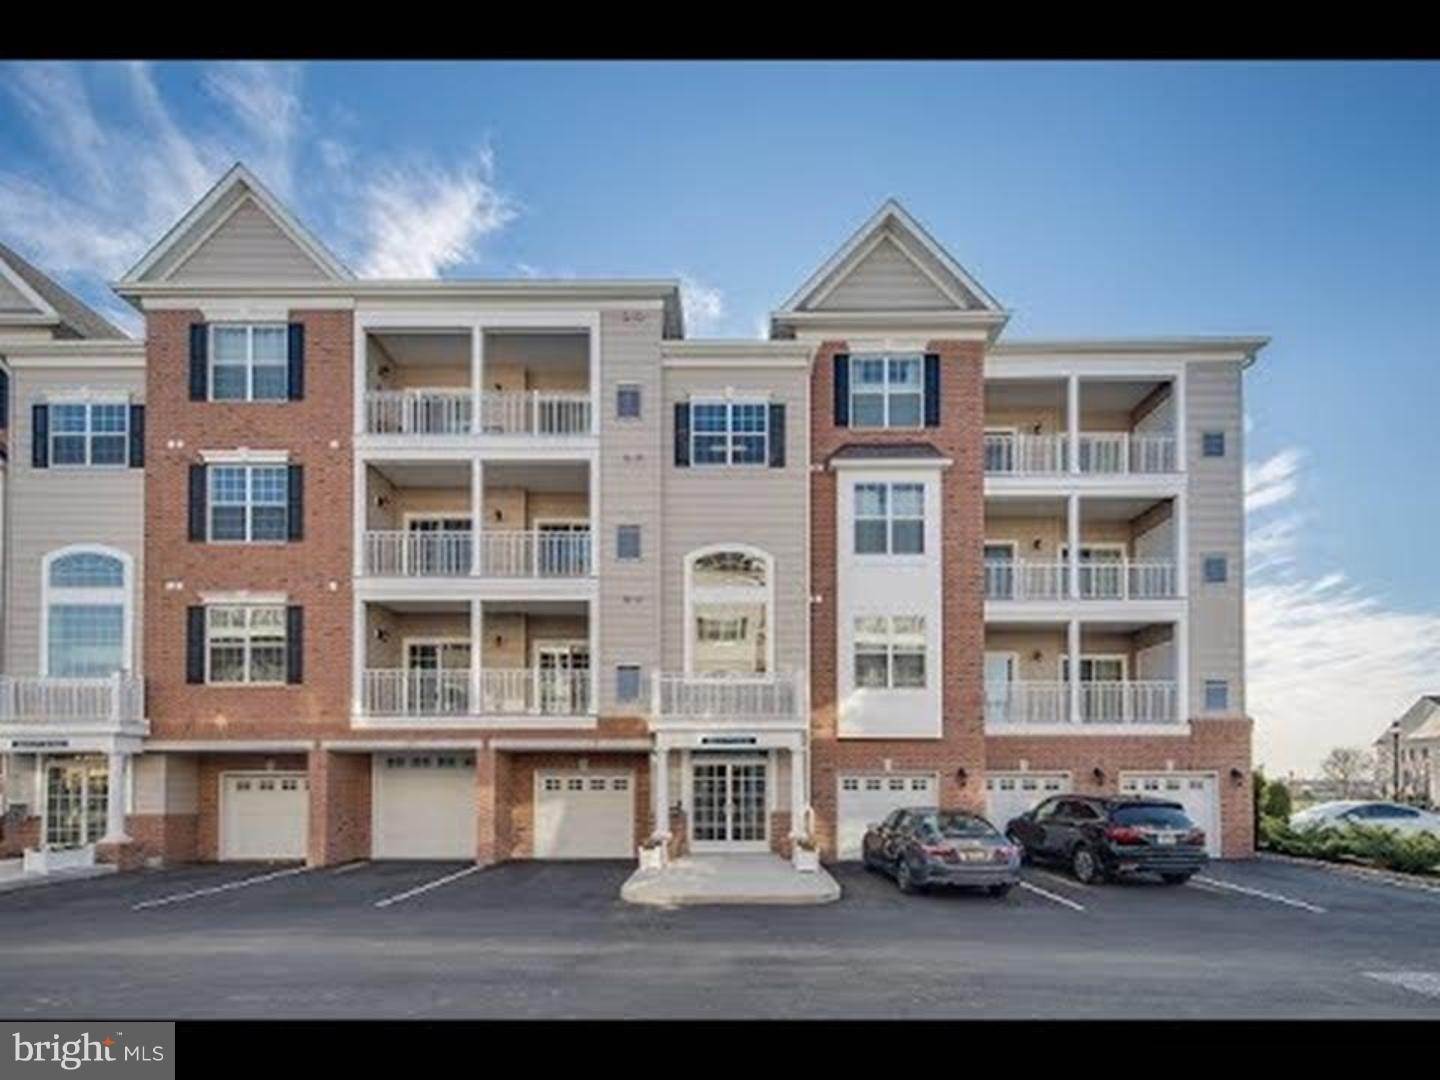 Apartments at 5221 PALOMINO Court Cherry Hill, New Jersey 08002 United States